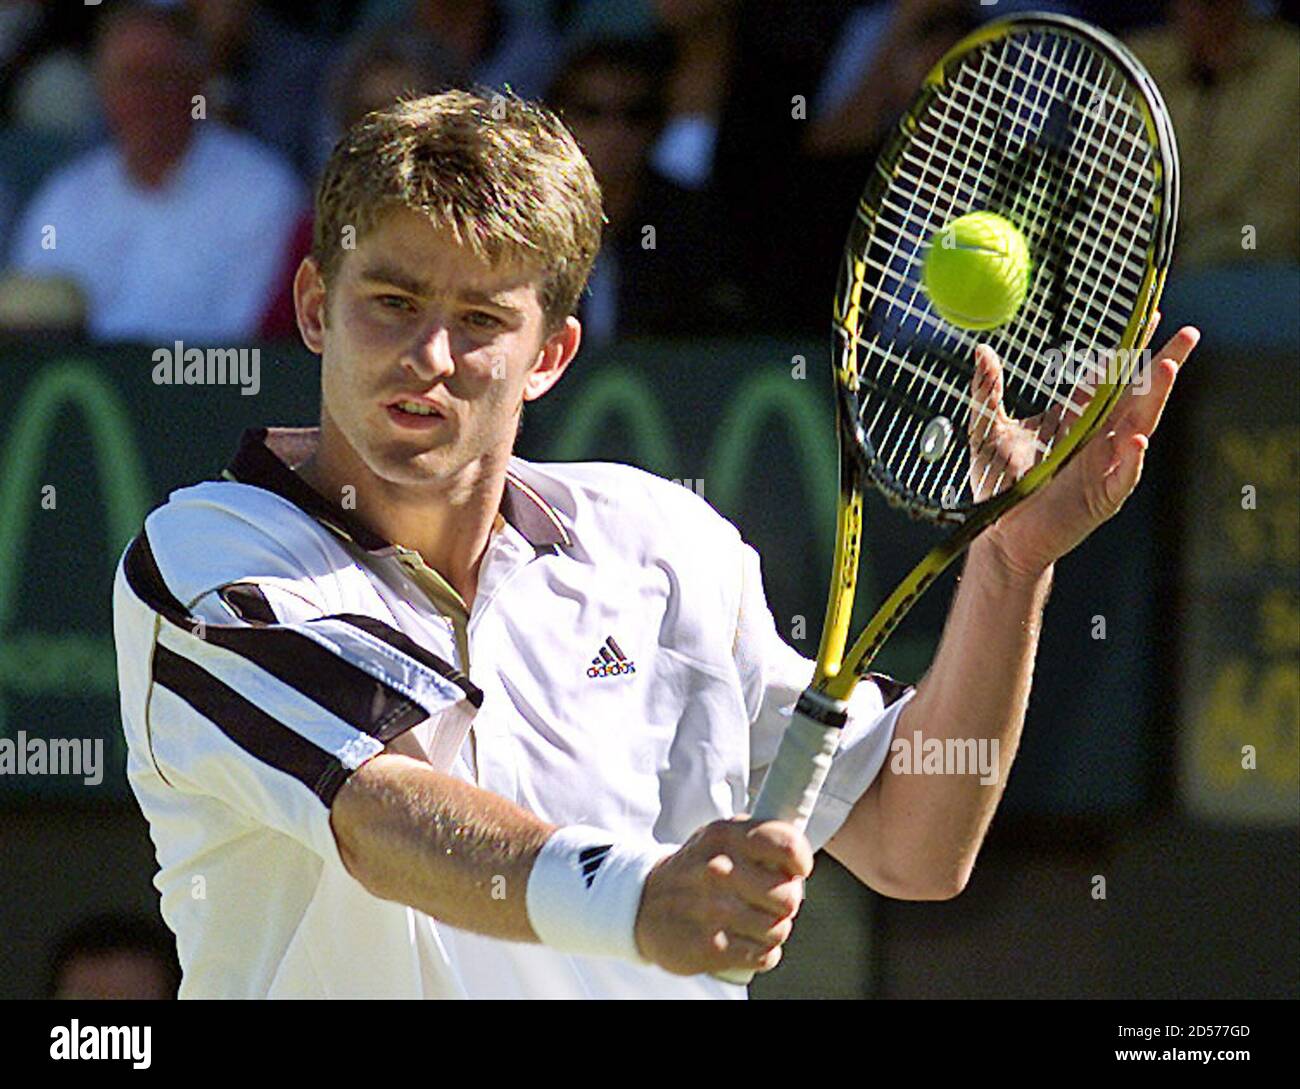 German Davis Cup team player Michael Kohlmann hits a backhand volley during  his singles match against Australia's Lleyton Hewitt at Adelaide's Memorial Drive  tennis courts April 7. Hewitt won 6-1 in the